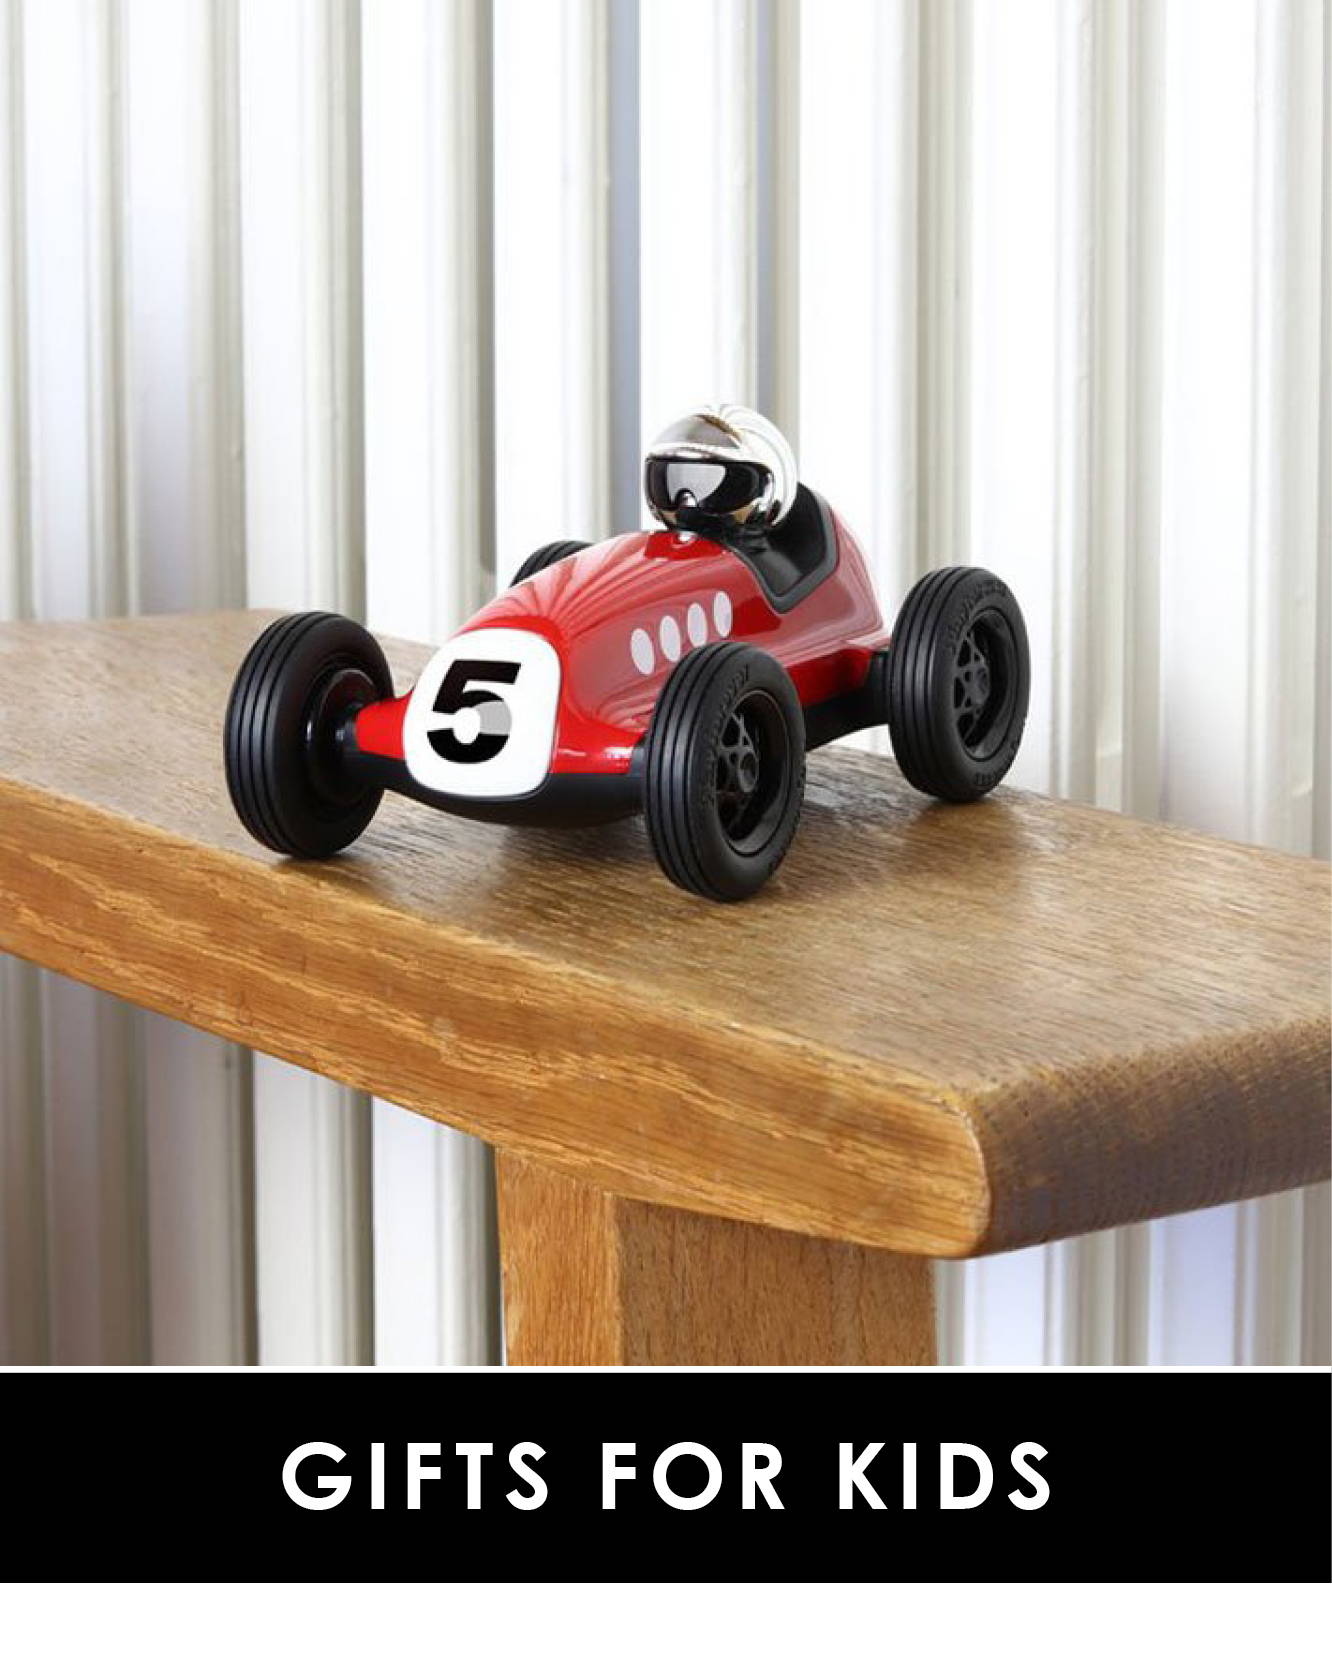 Gifts For Kids